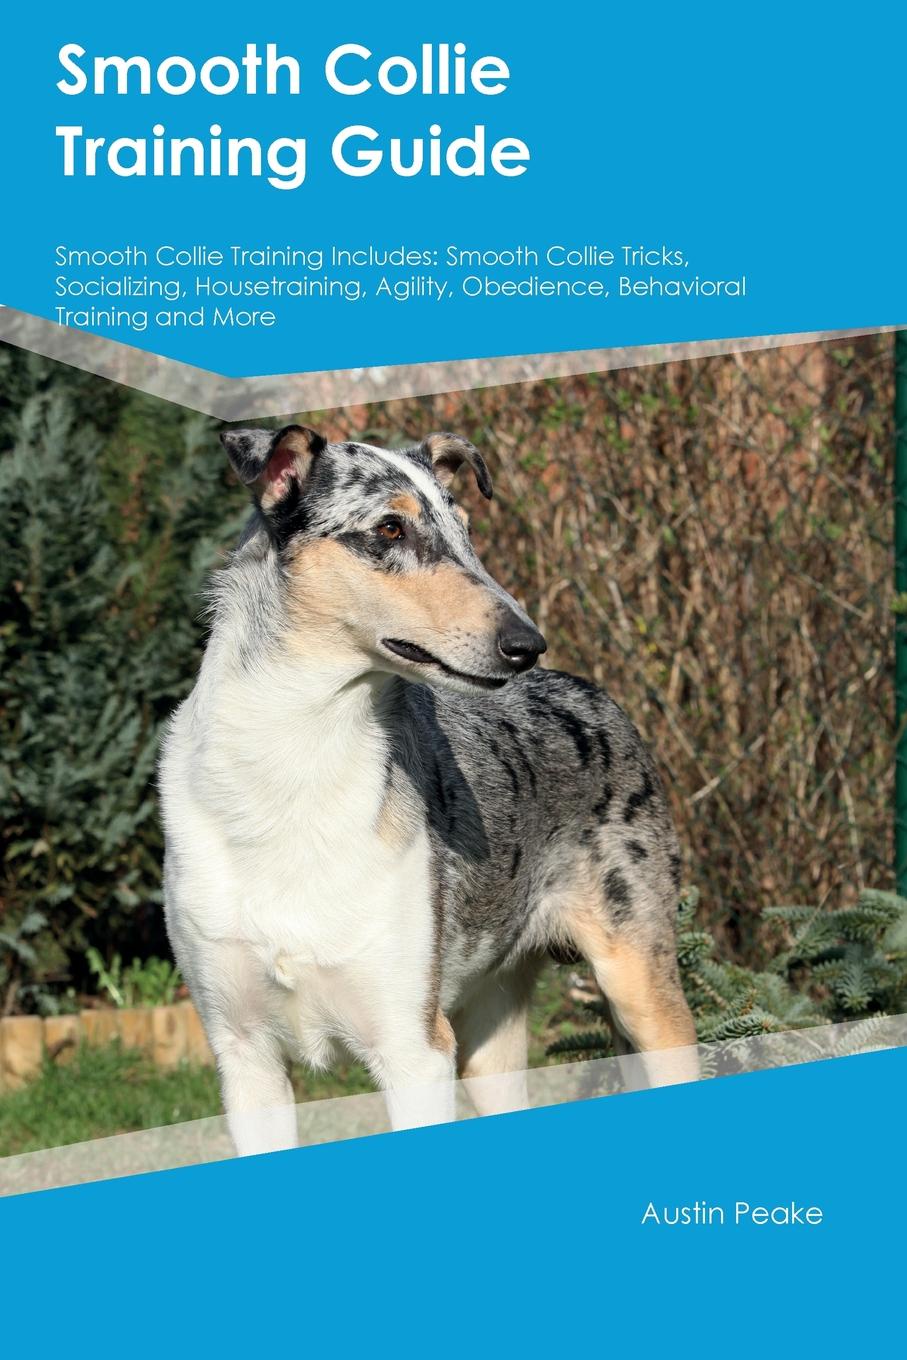 Smooth Collie Training Guide Smooth Collie Training Includes. Smooth Collie Tricks, Socializing, Housetraining, Agility, Obedience, Behavioral Training and More